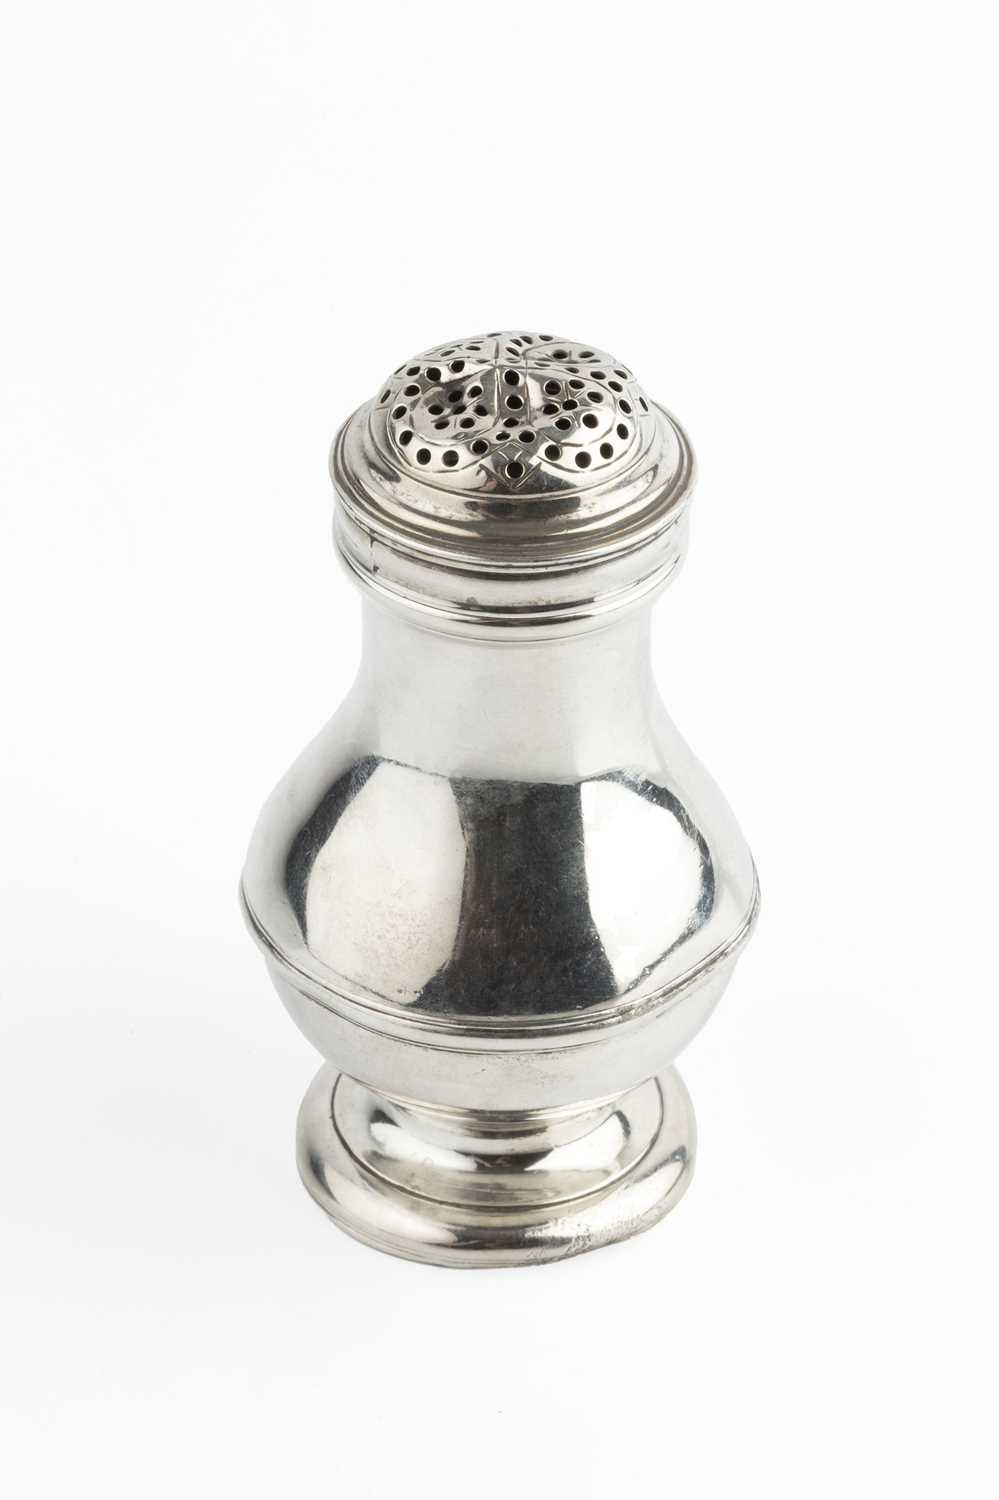 A George II silver pepper castor, of baluster form, with girdled body and pierced cover, by